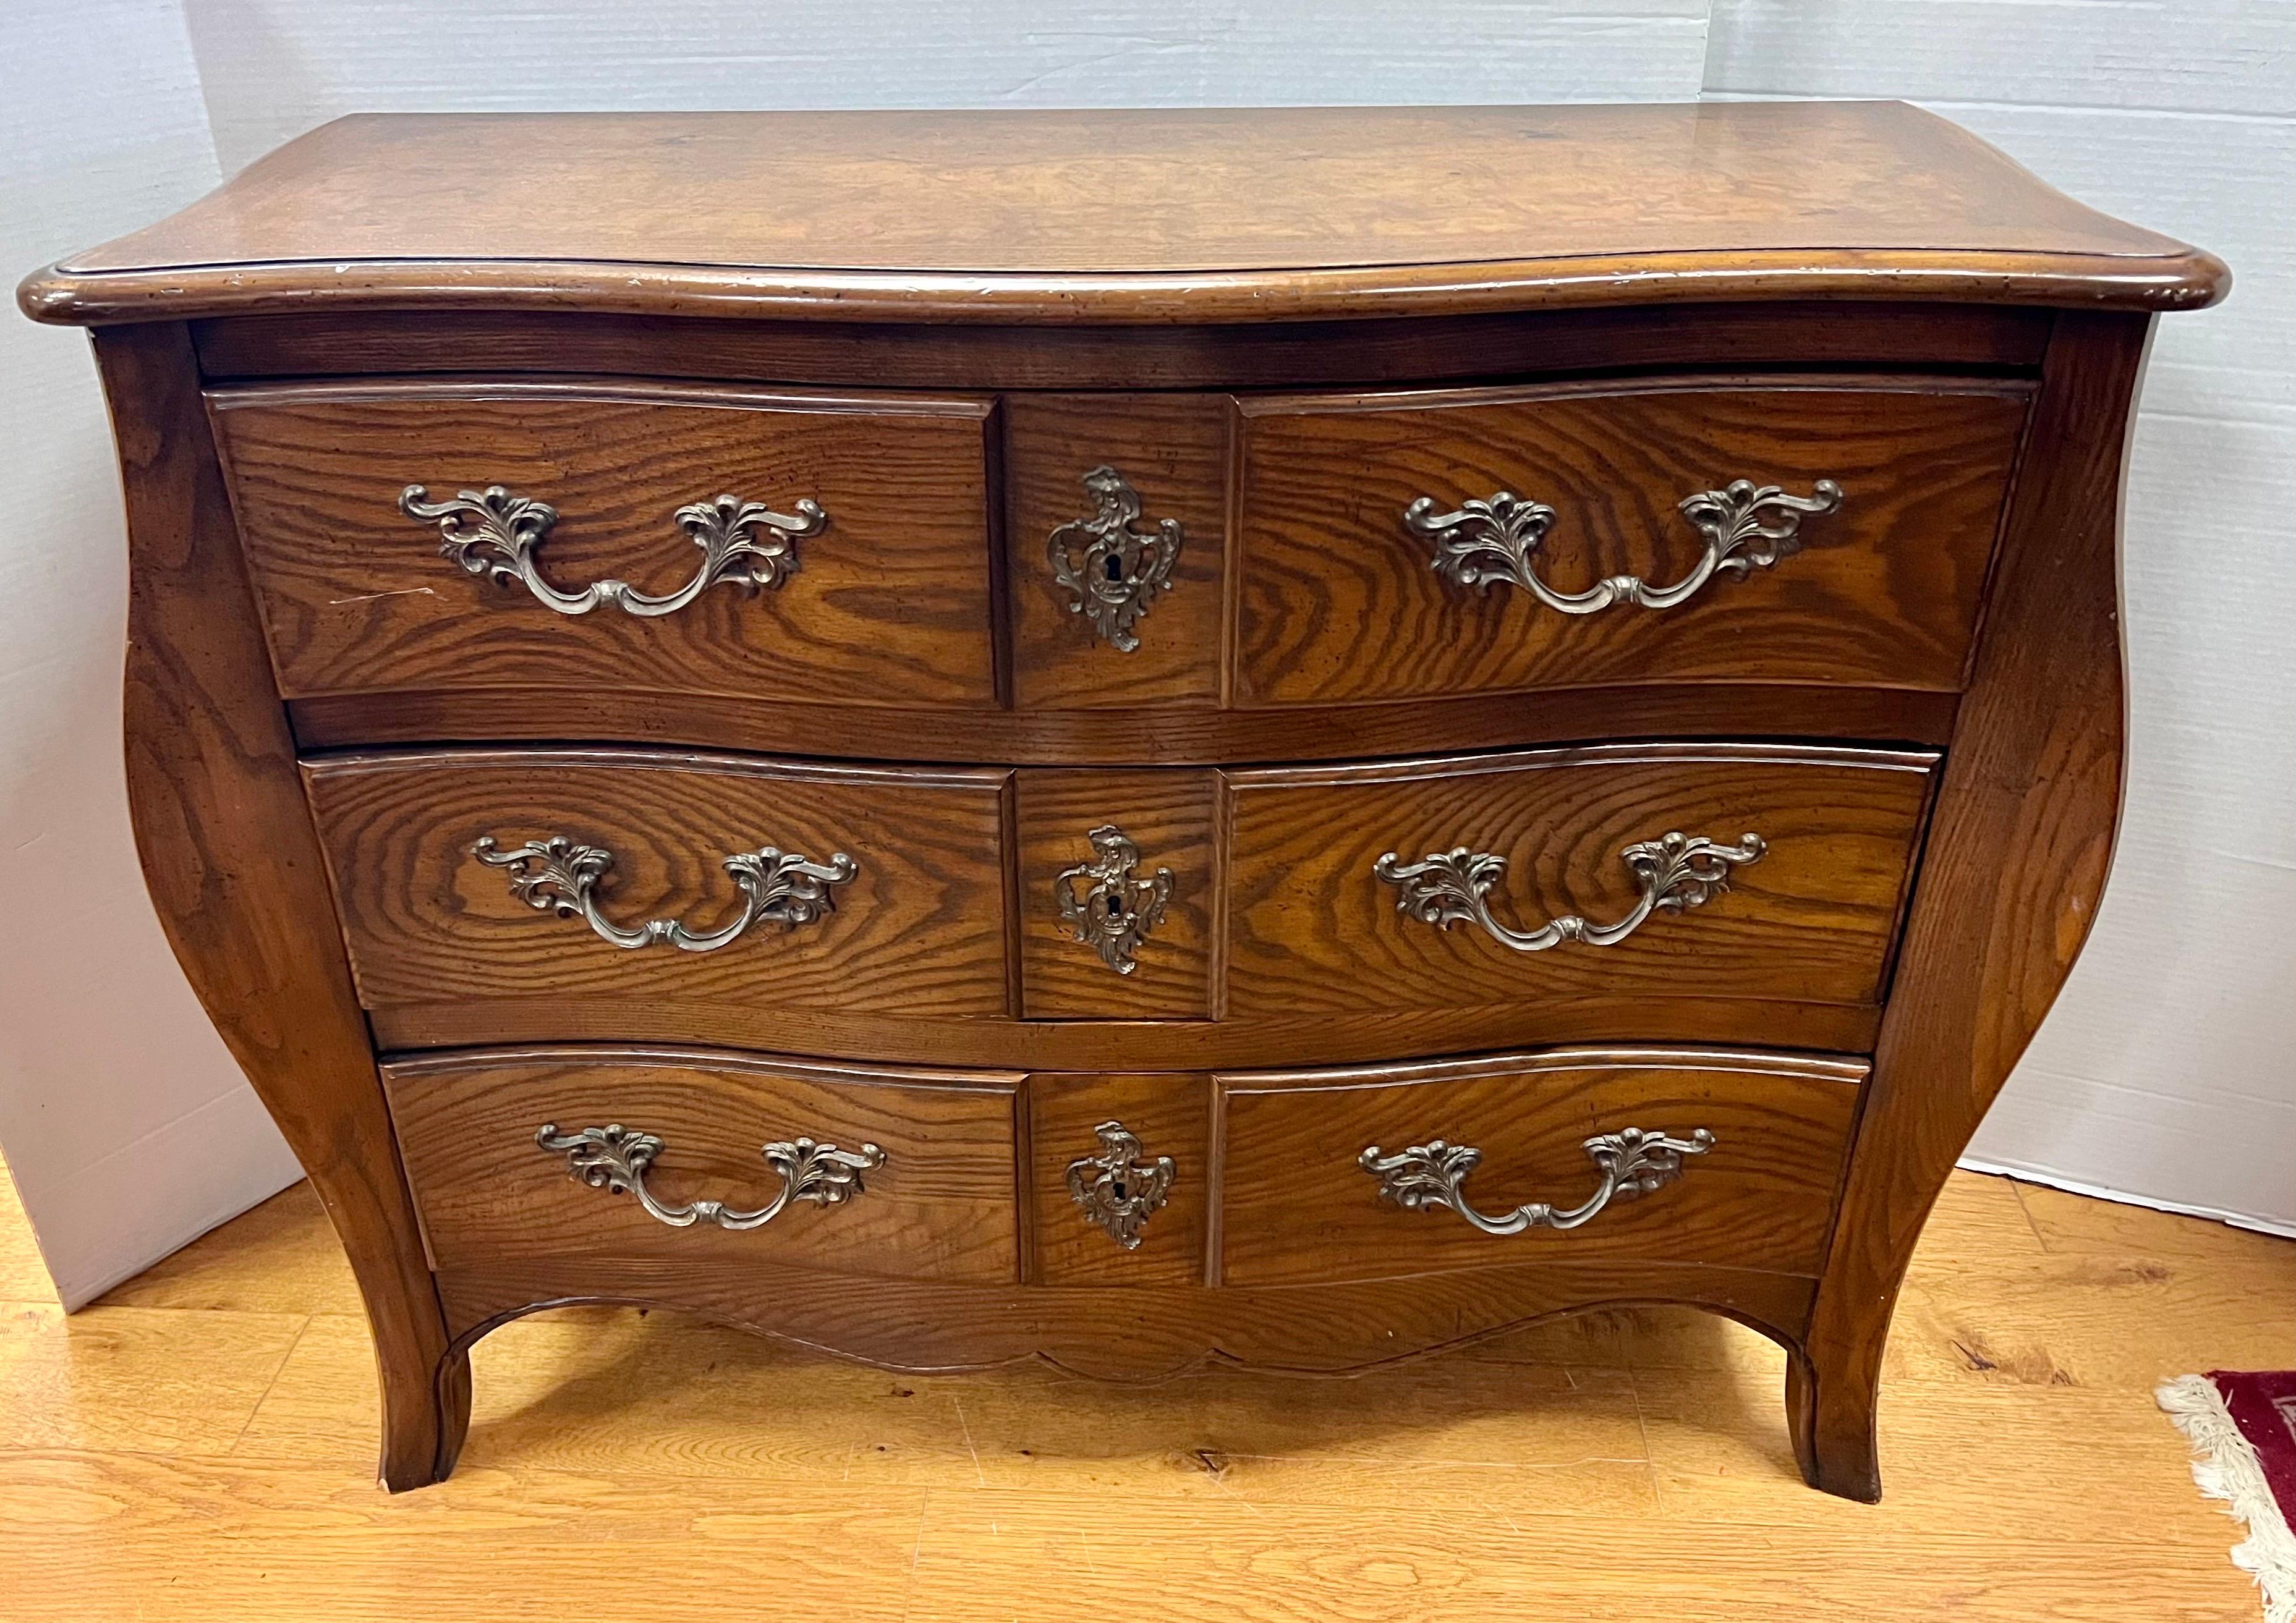 Elegant and coveted bombe chest commode by Baker Furniture Company.
Features three dovetailed drawers with ornate, original hardware.  Baker medallion present inside drawer as shown.